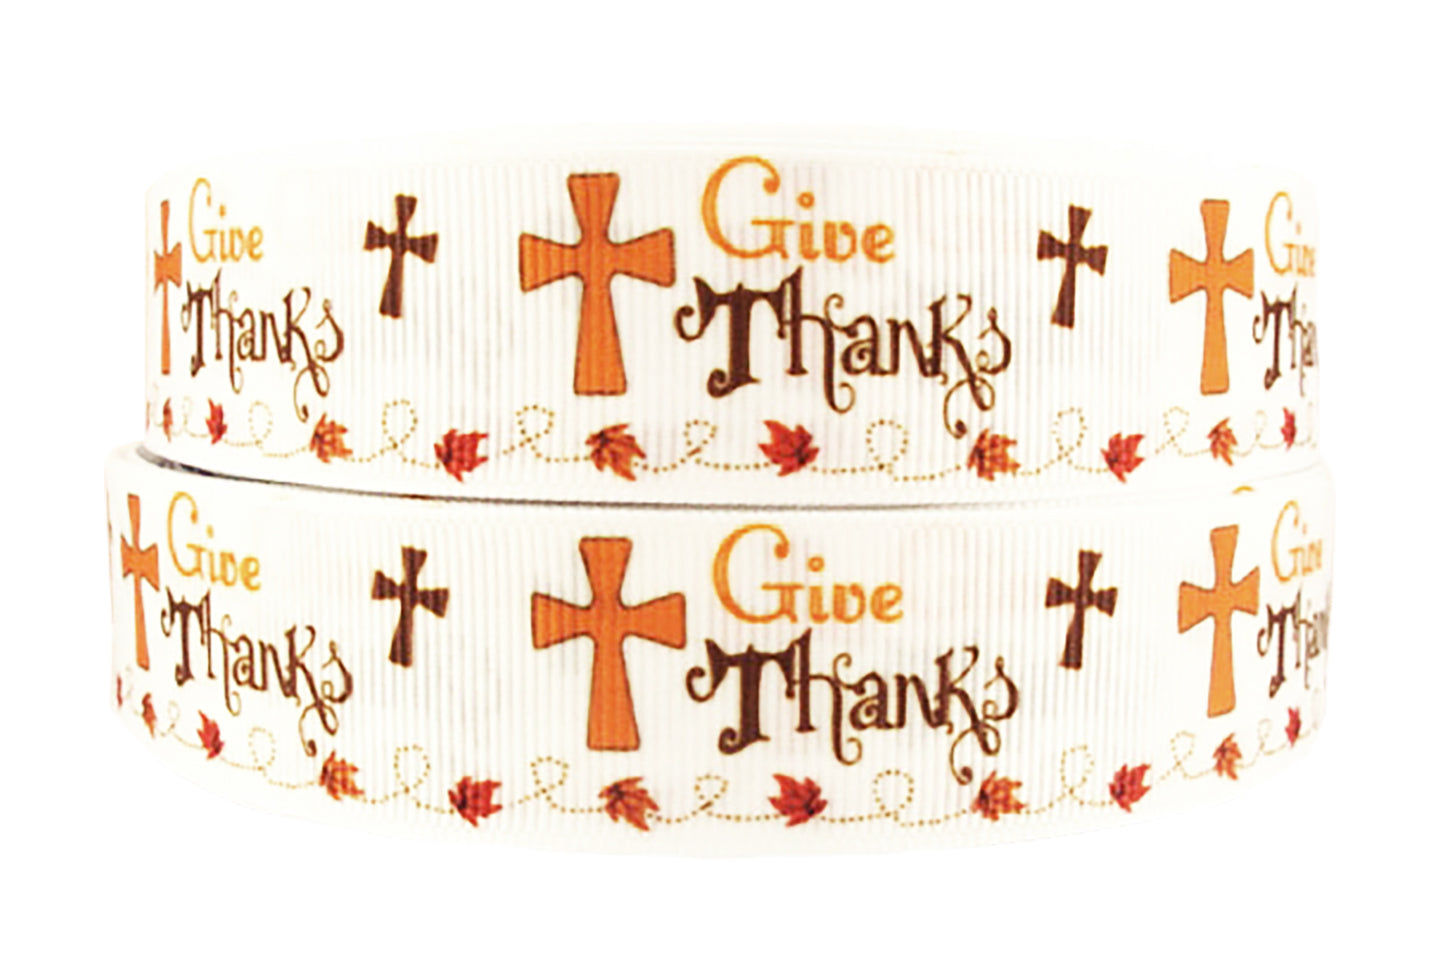 WD2U Baby Girls Set of 2 Thanksgiving Cross Pigtail Hair Bows